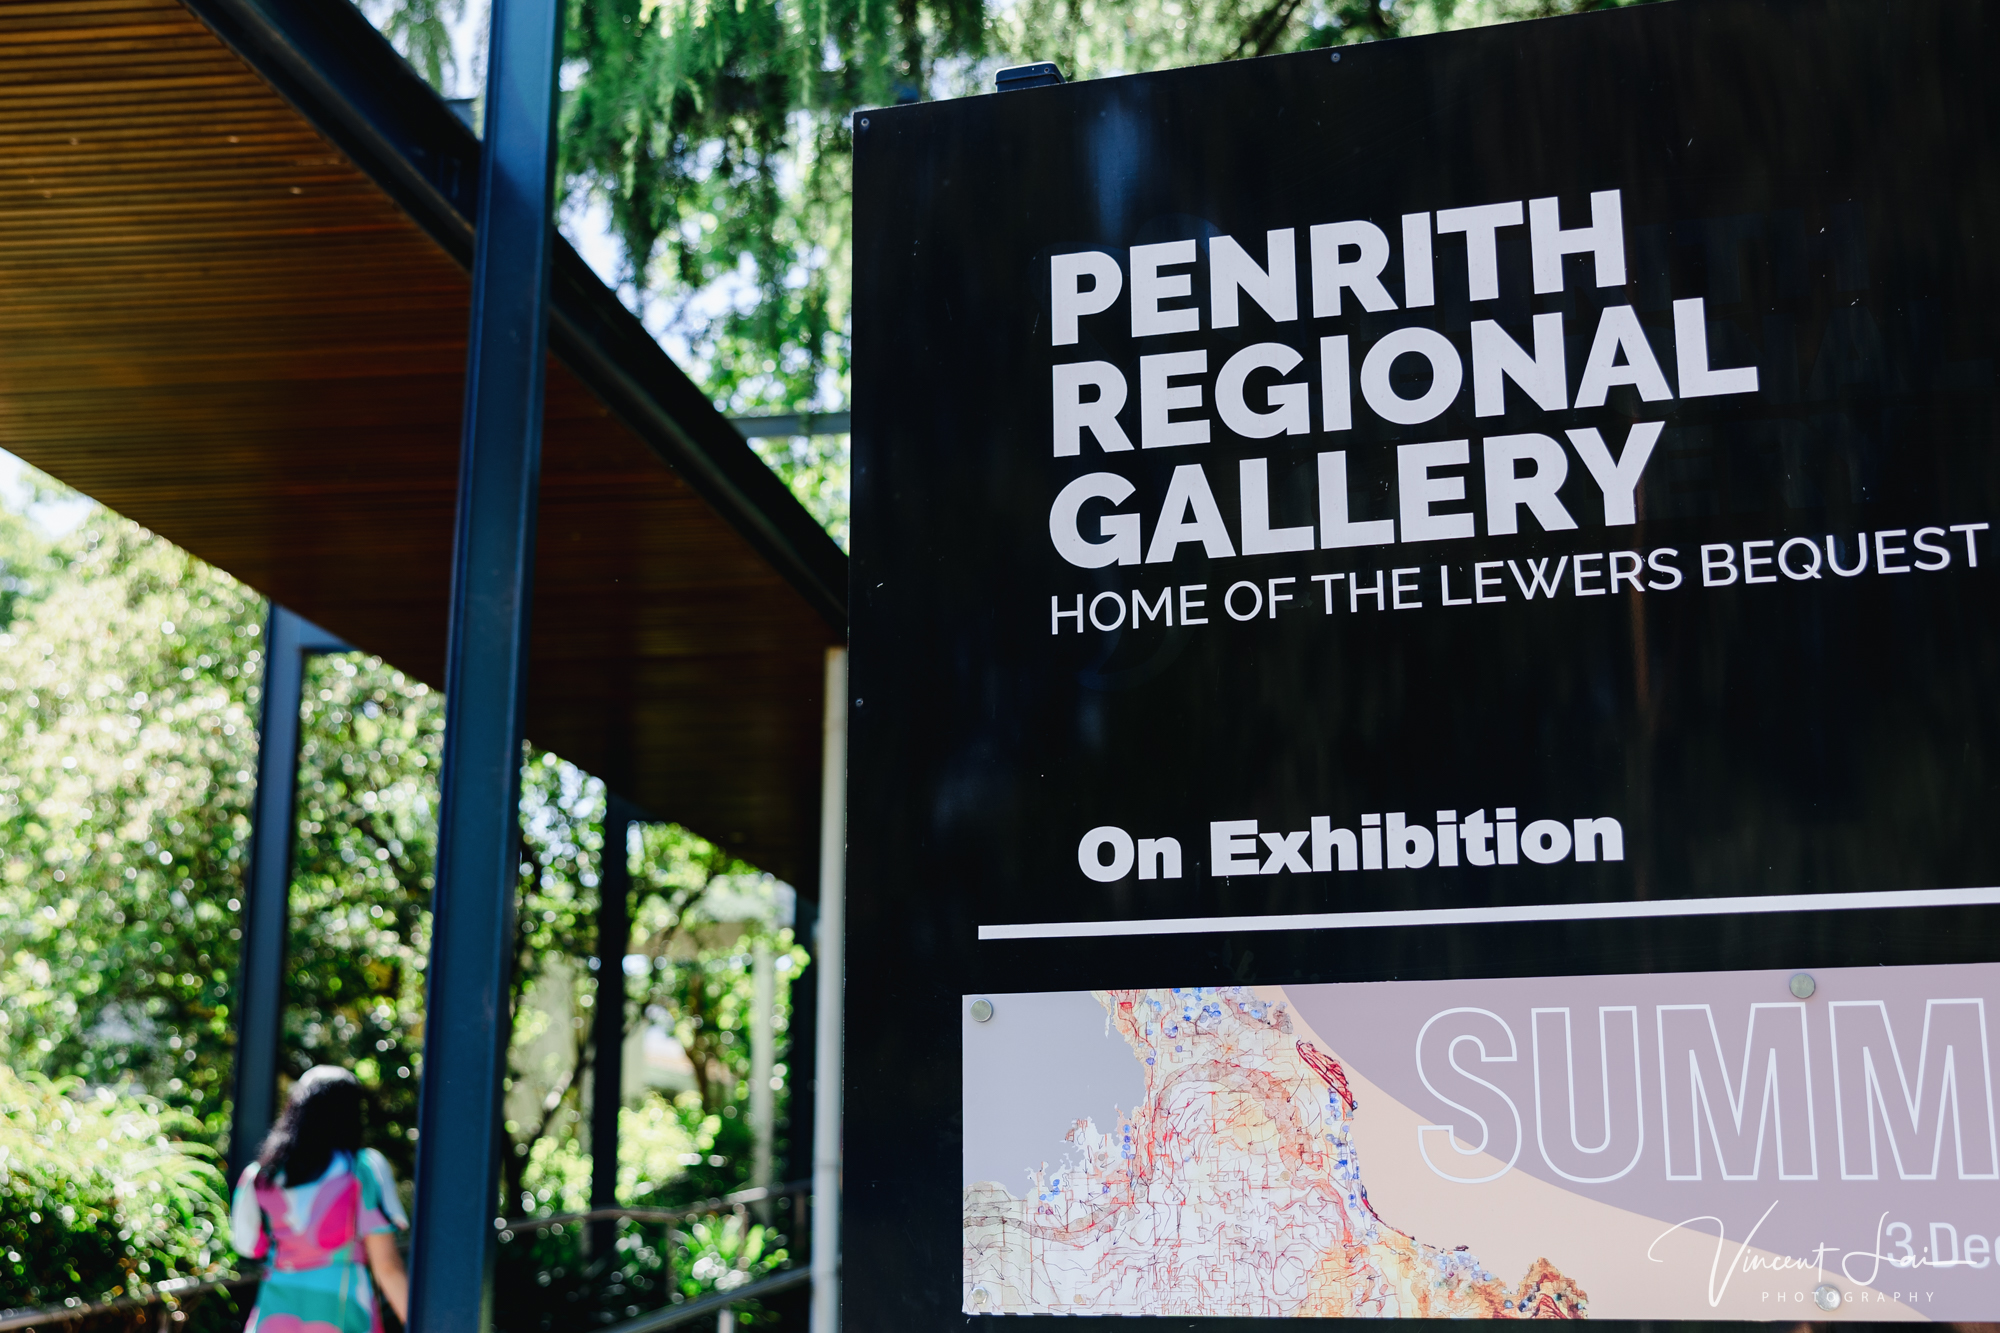 Wedding at Penrith Regional Art Gallery was a lovely day to remember